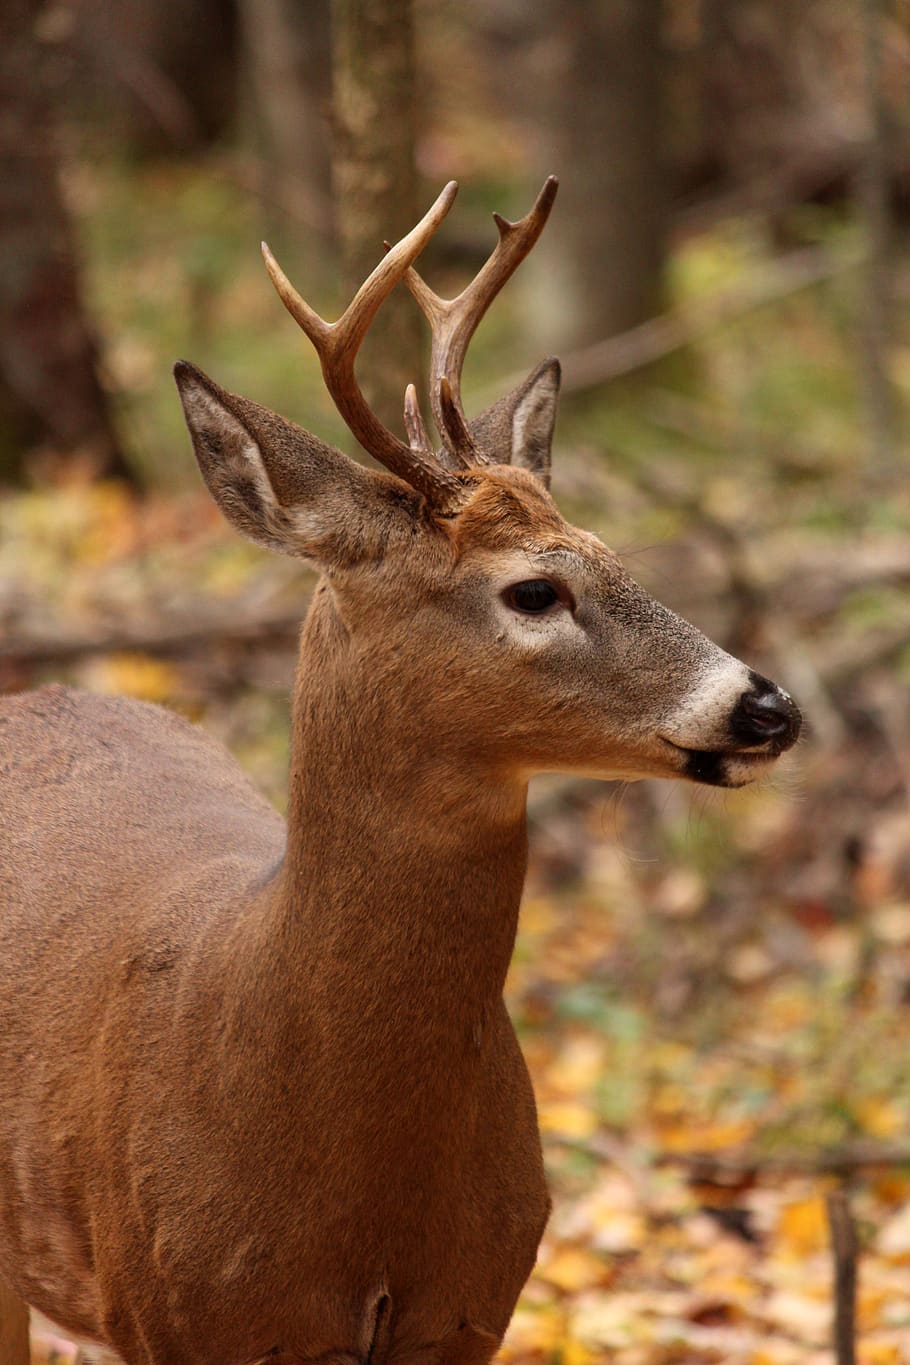 whitetail, deer, wildlife, animal, nature, wild, buck, male, antlers, forest